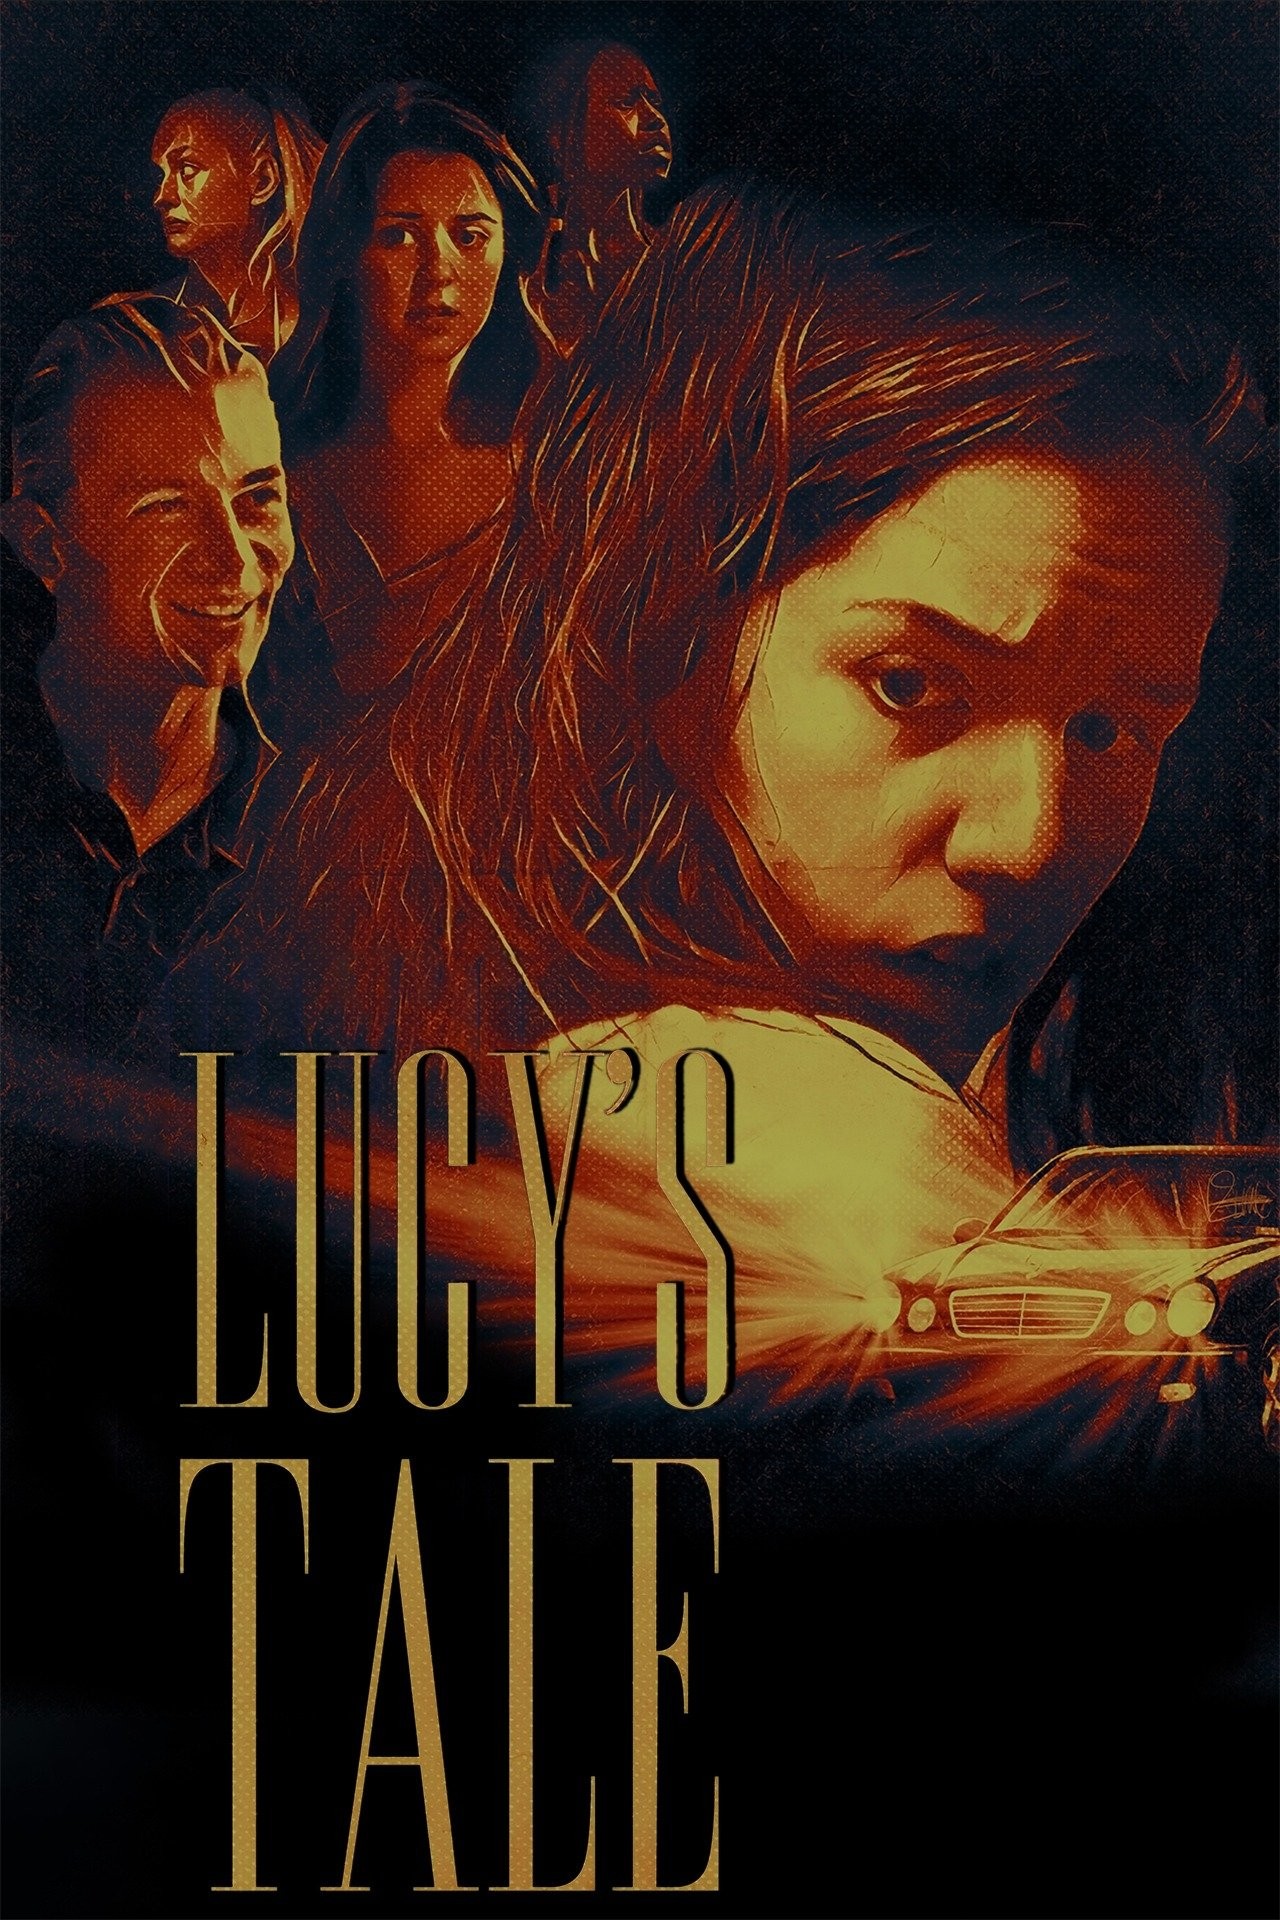 Lucy's tale